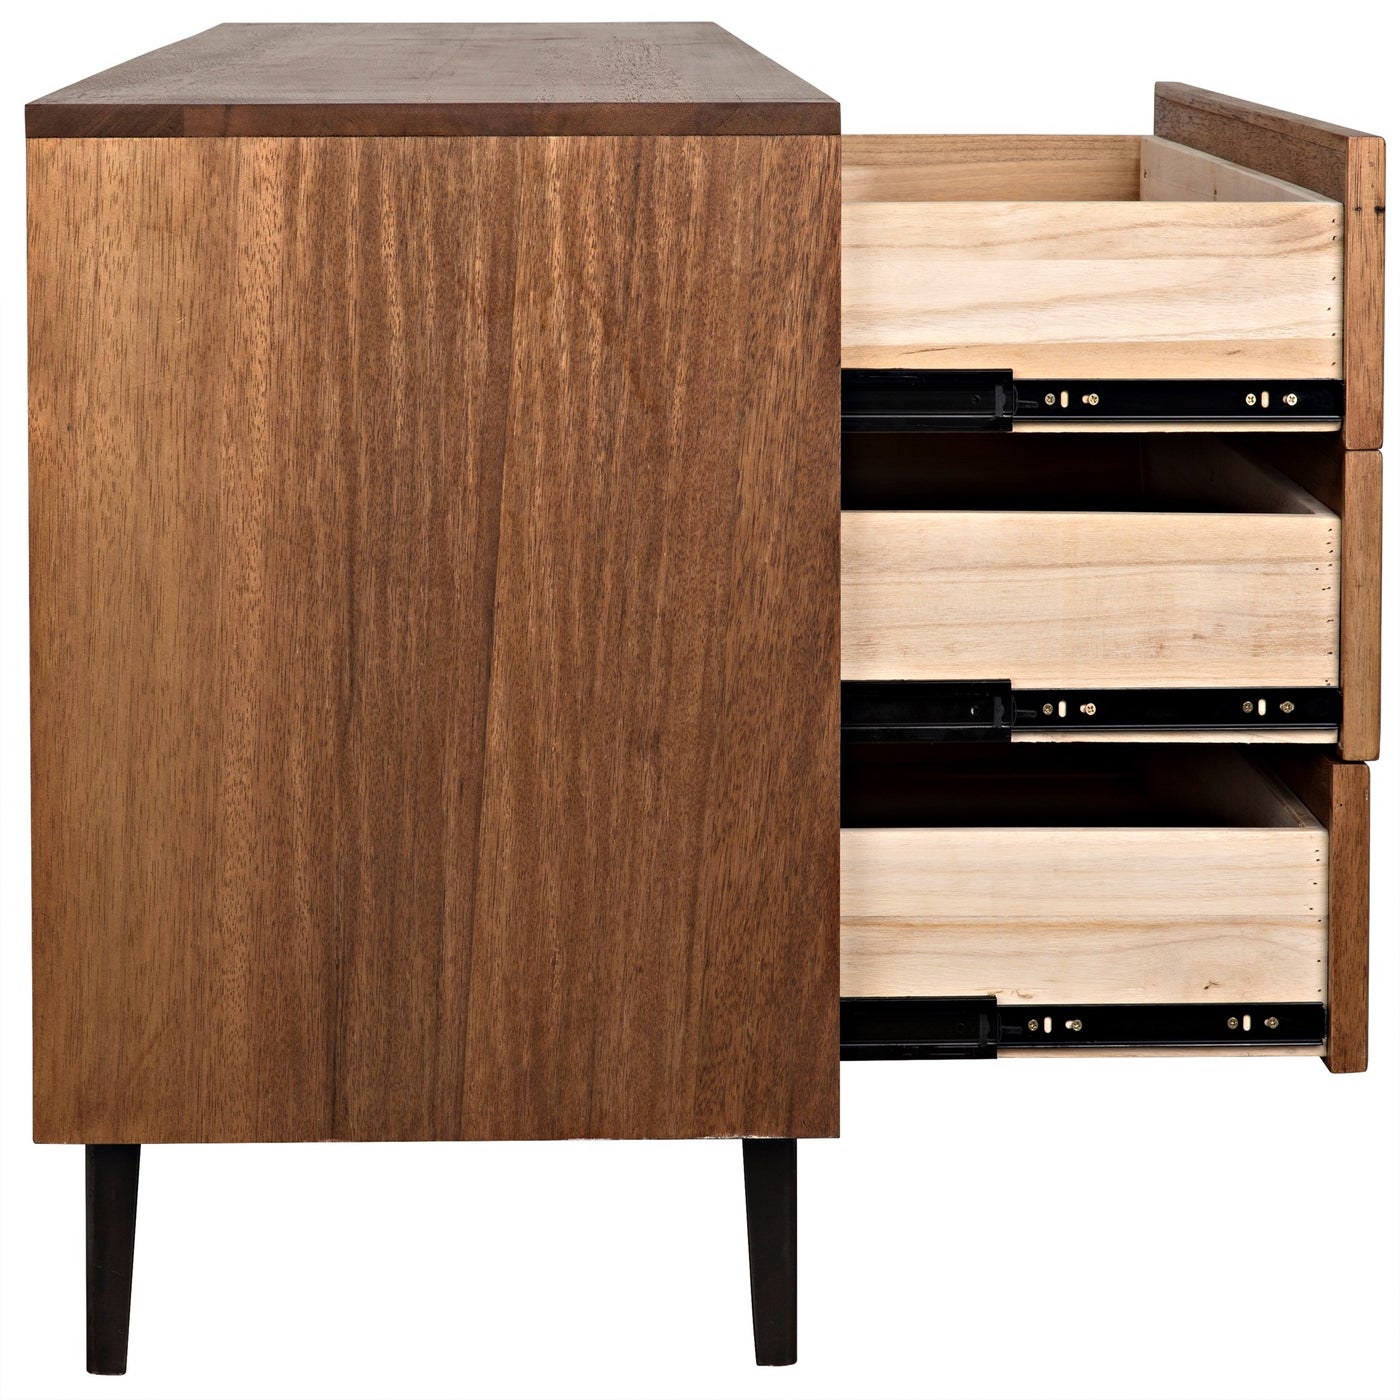 Bourgeois Noir (noir) dressers & consoles Walnut Trading, and Sideboard, - sideboards | Steel